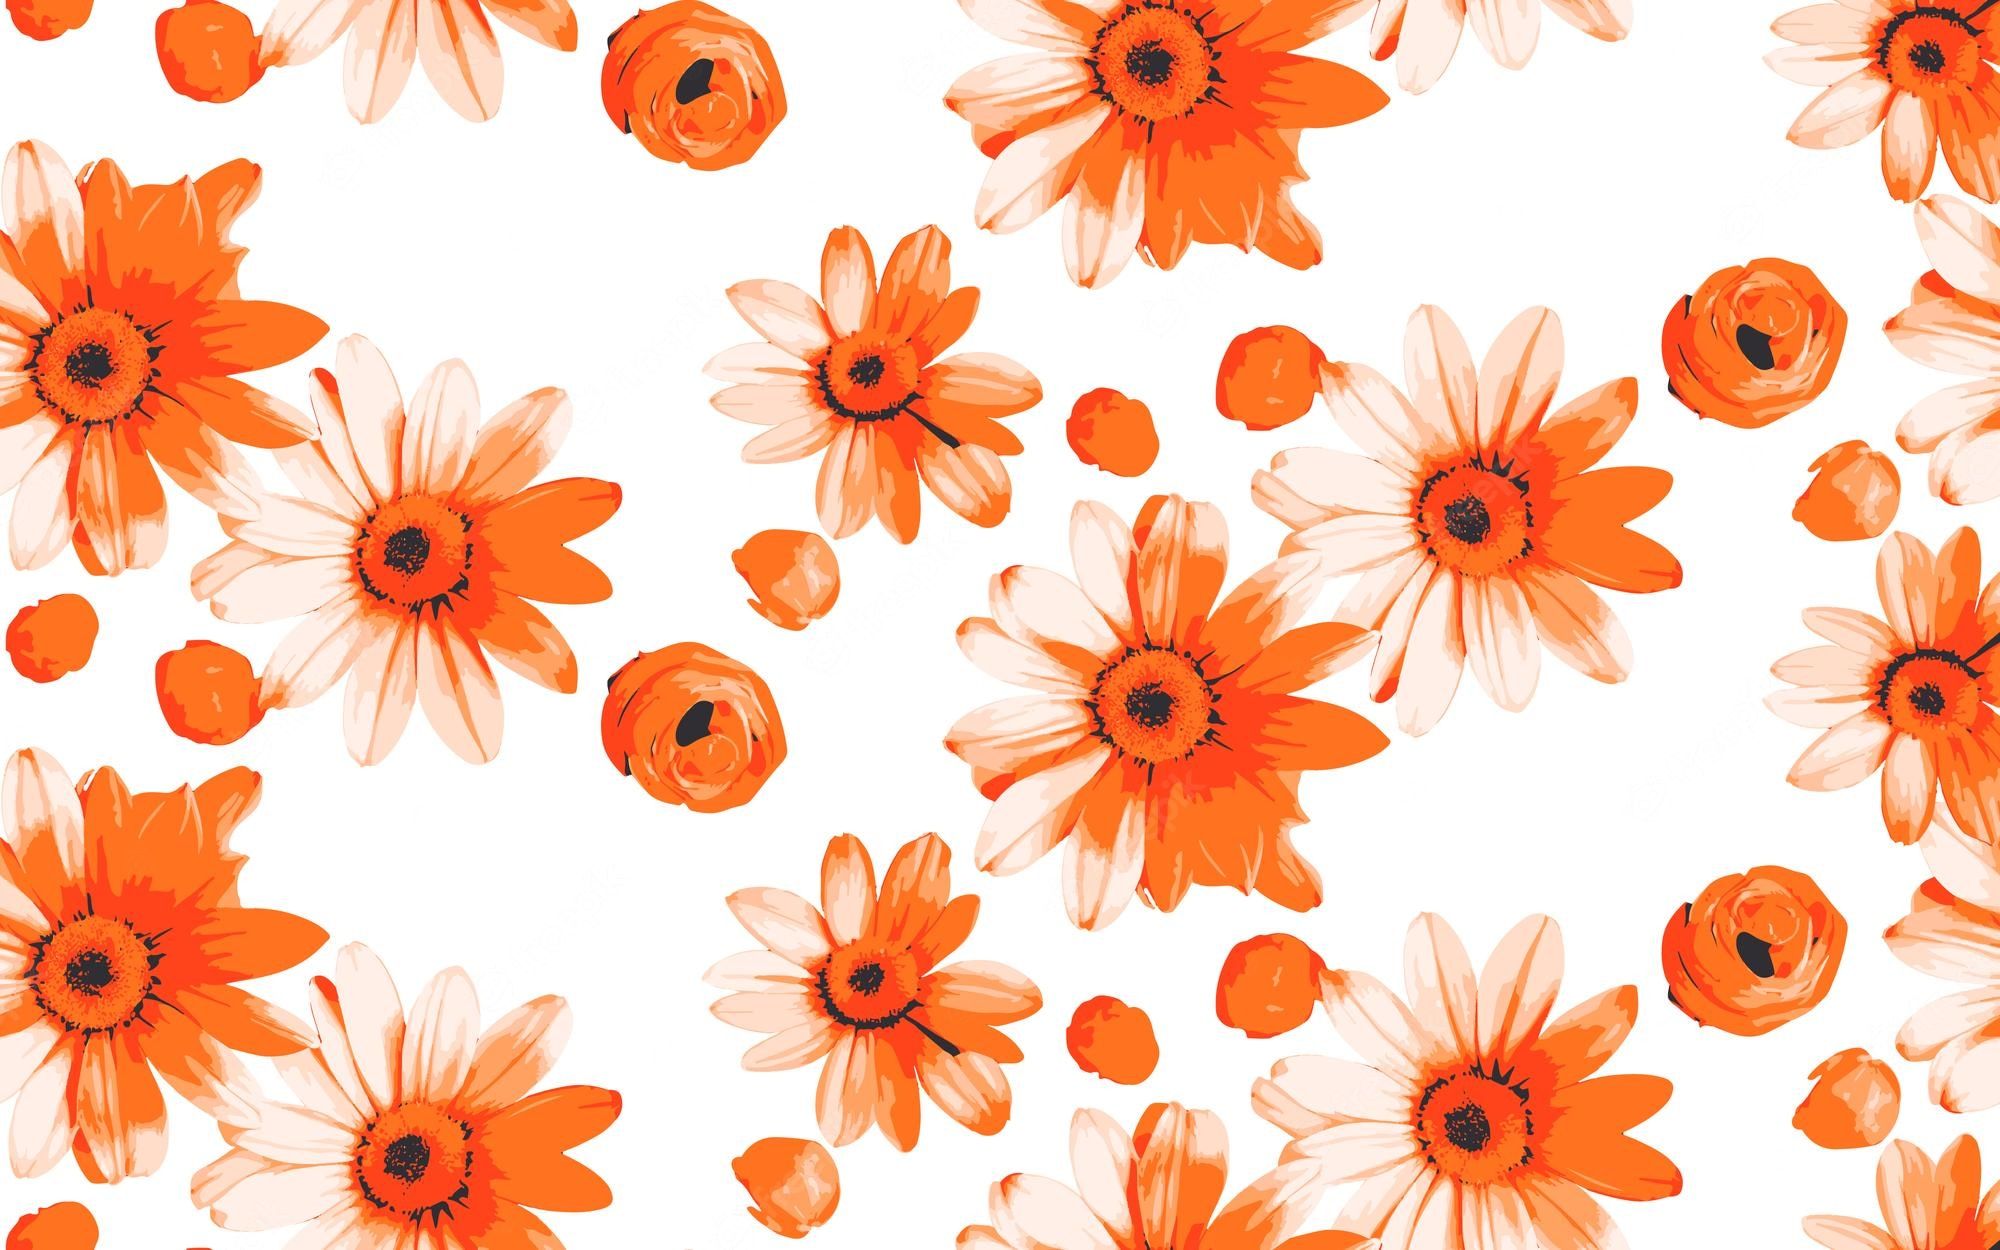 Premium Vector. Orange flowers elements for wrappers, wallpaper, postcards, greeting cards, wedding invites